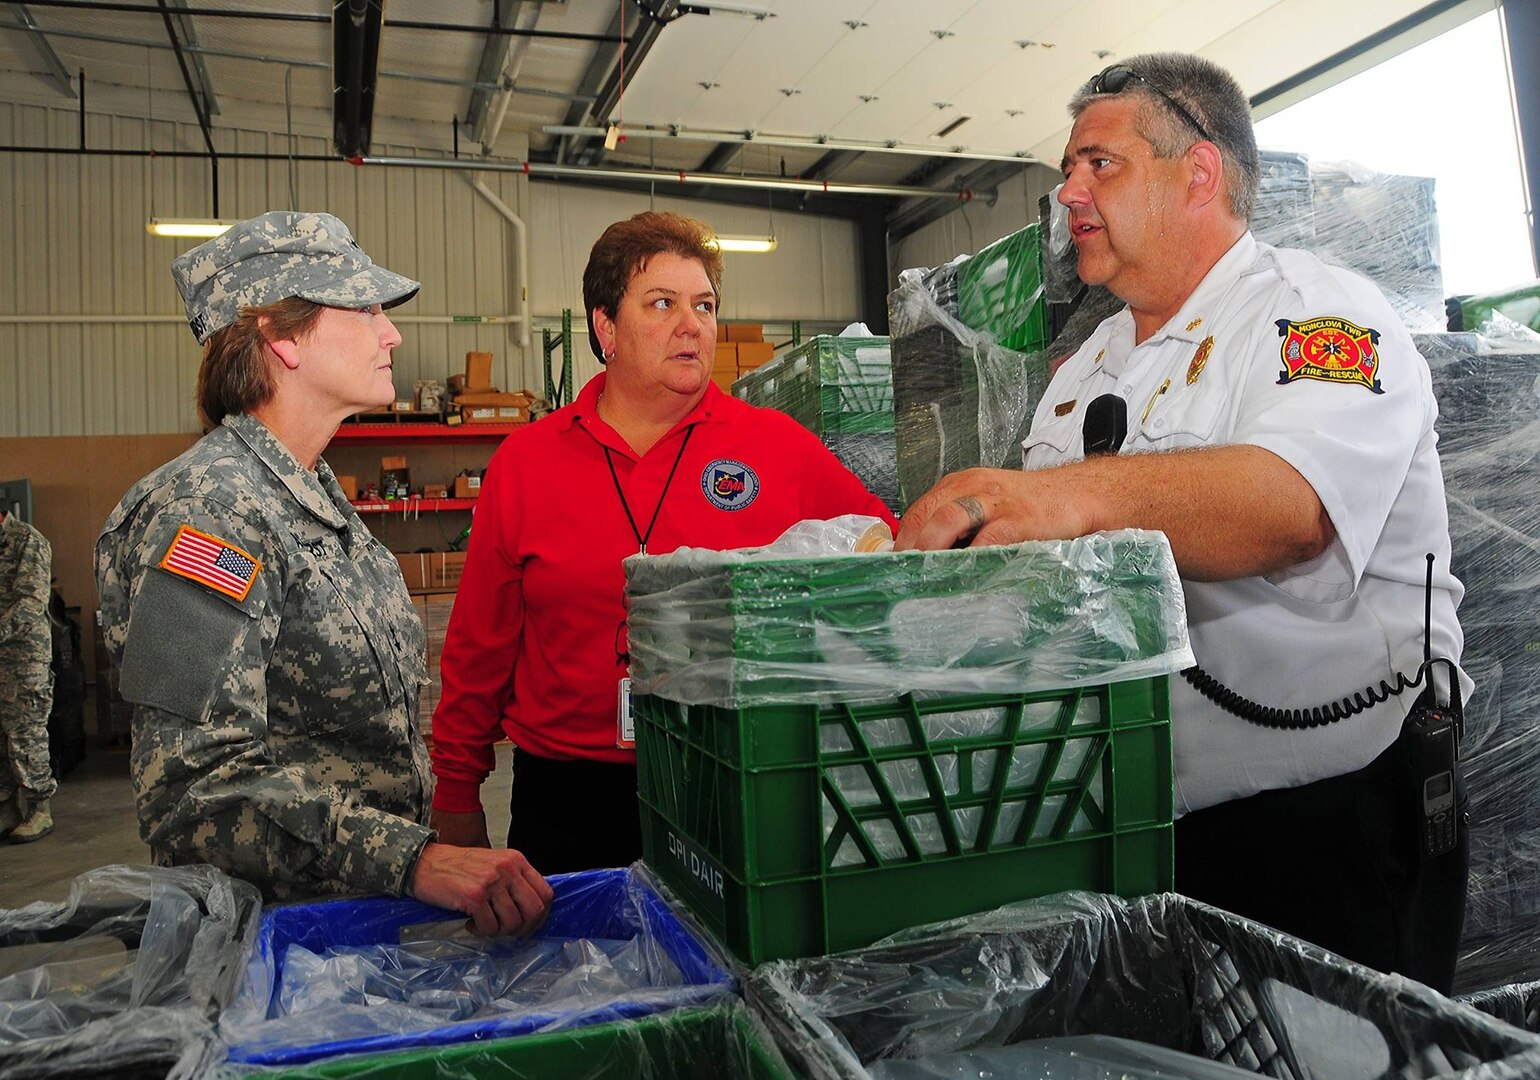 Maj. Gen. Deborah A. Ashenhurst, adjutant general of the Ohio National Guard, visits with emergency personnel Aug. 3, 2014, in Toledo, which is experiencing a clean-water emergency. Pictured in center is Sima Merick, assistant director of the Ohio Emergency Management Agency.